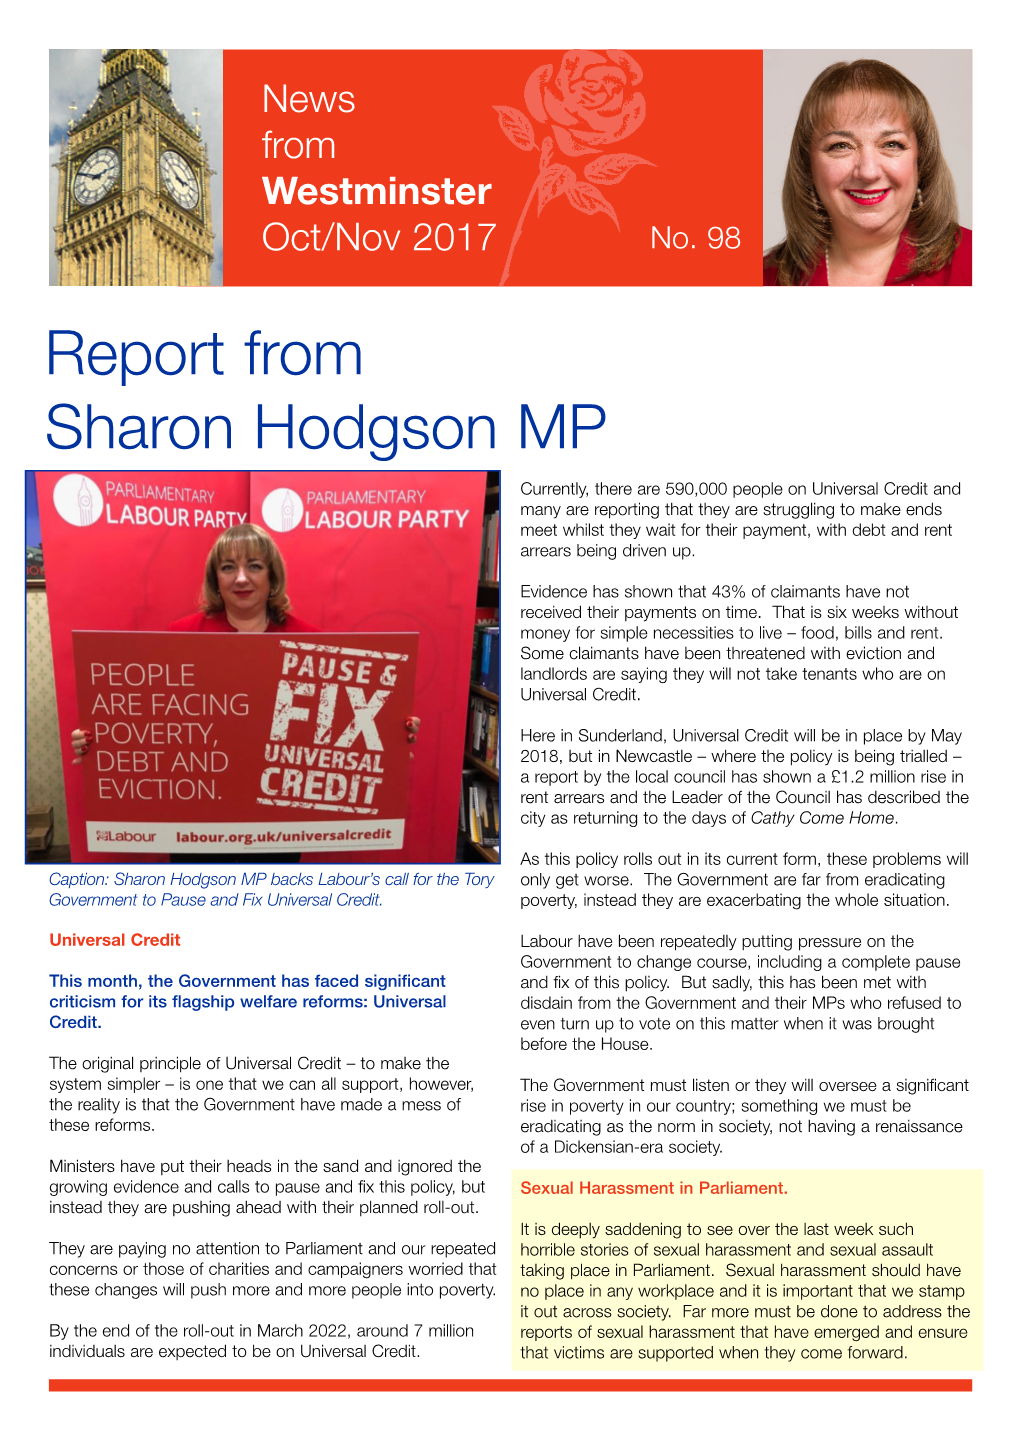 Report from Sharon Hodgson MP